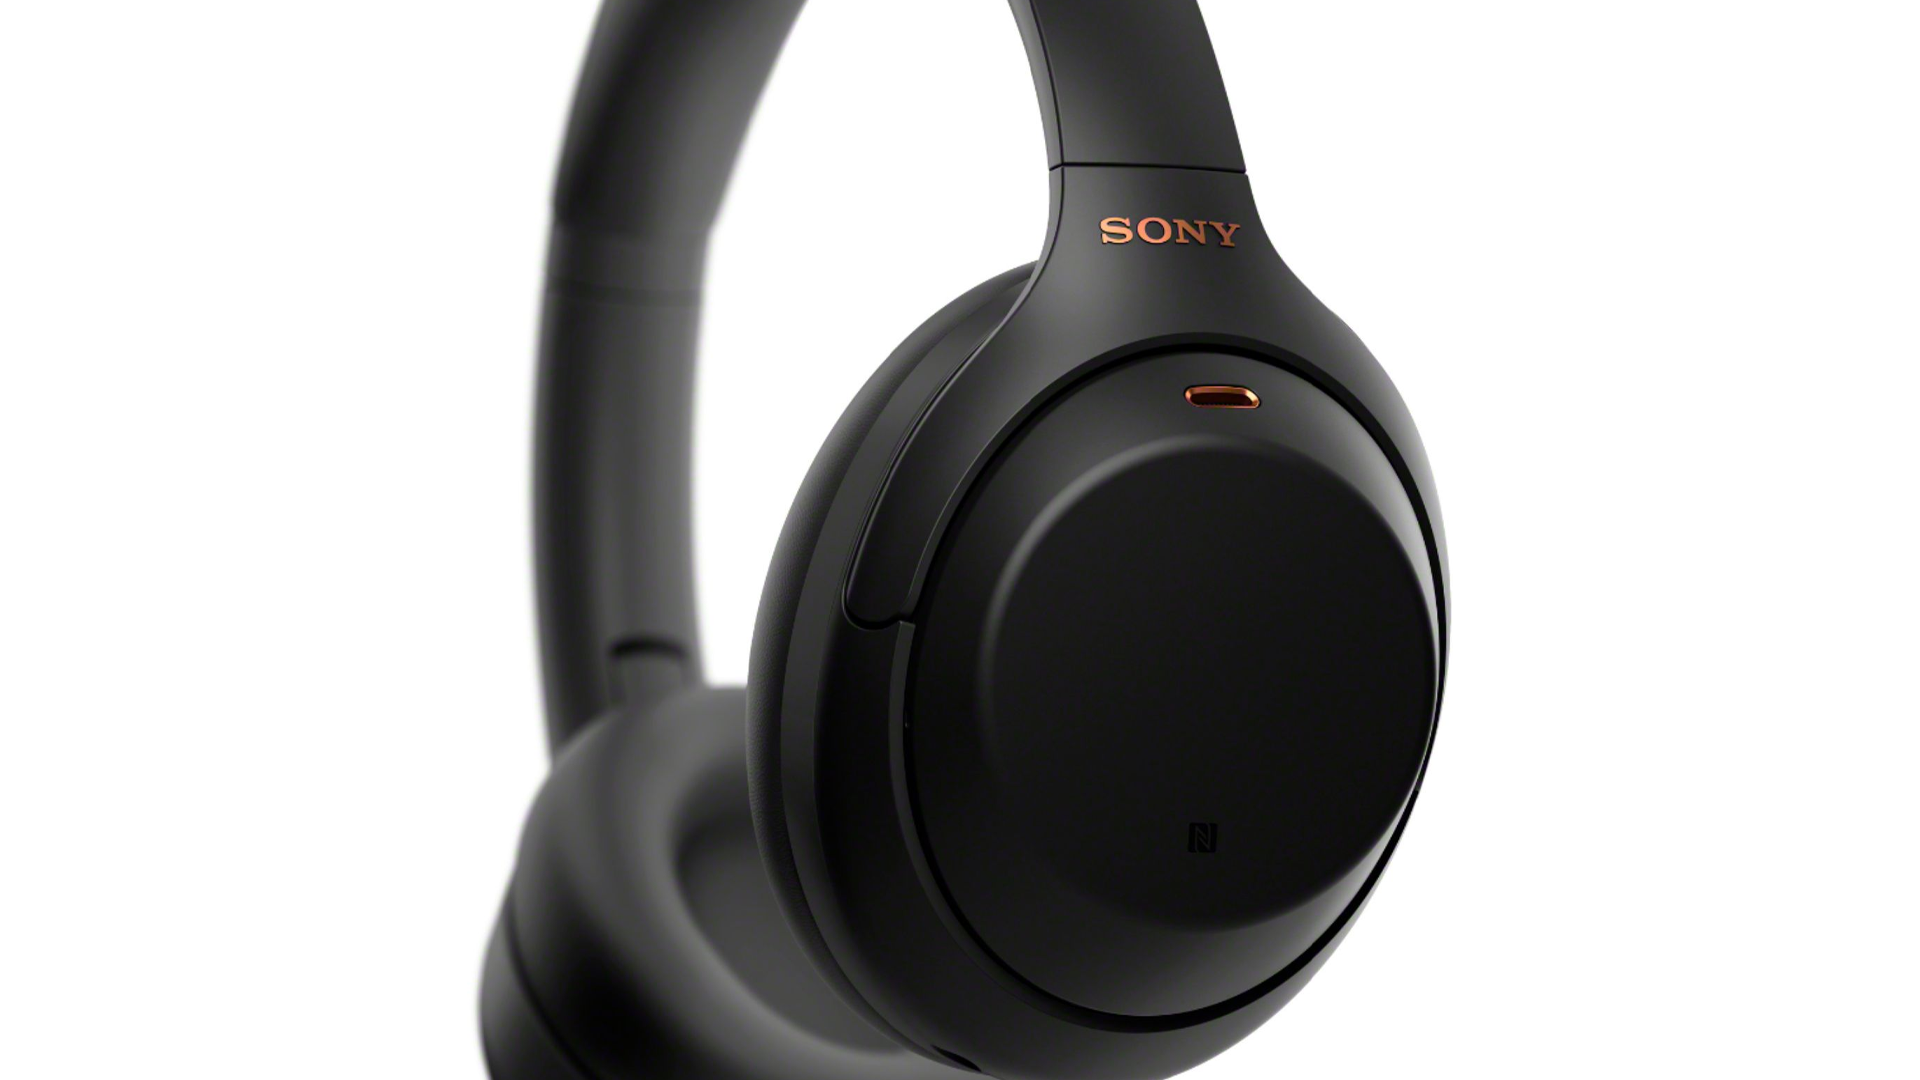 The Sony WH-1000XM4 wireless noise canceling headphones on a white background.